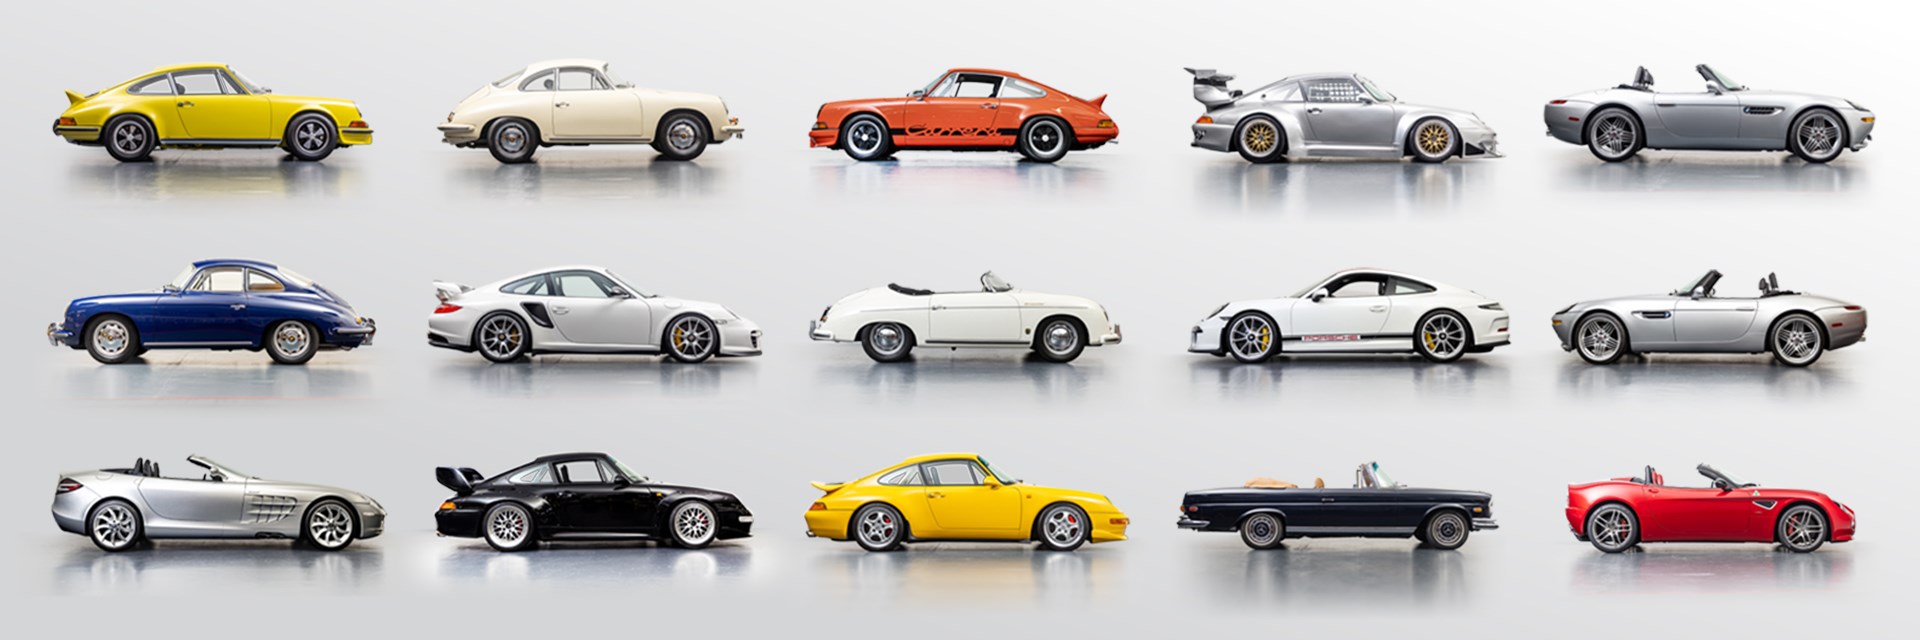 RM Sotheby's Carrera Collection Sale